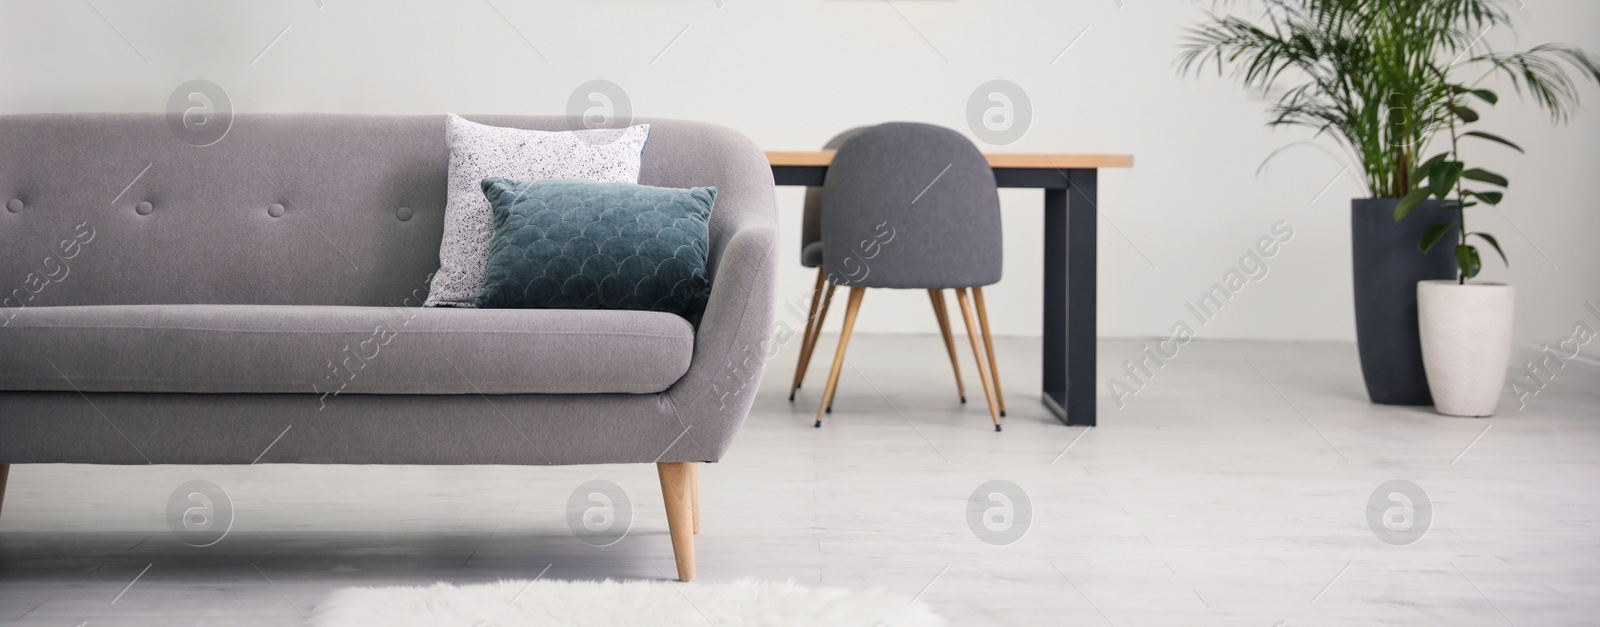 Image of Soft pillows on stylish grey sofa in living room. Banner design